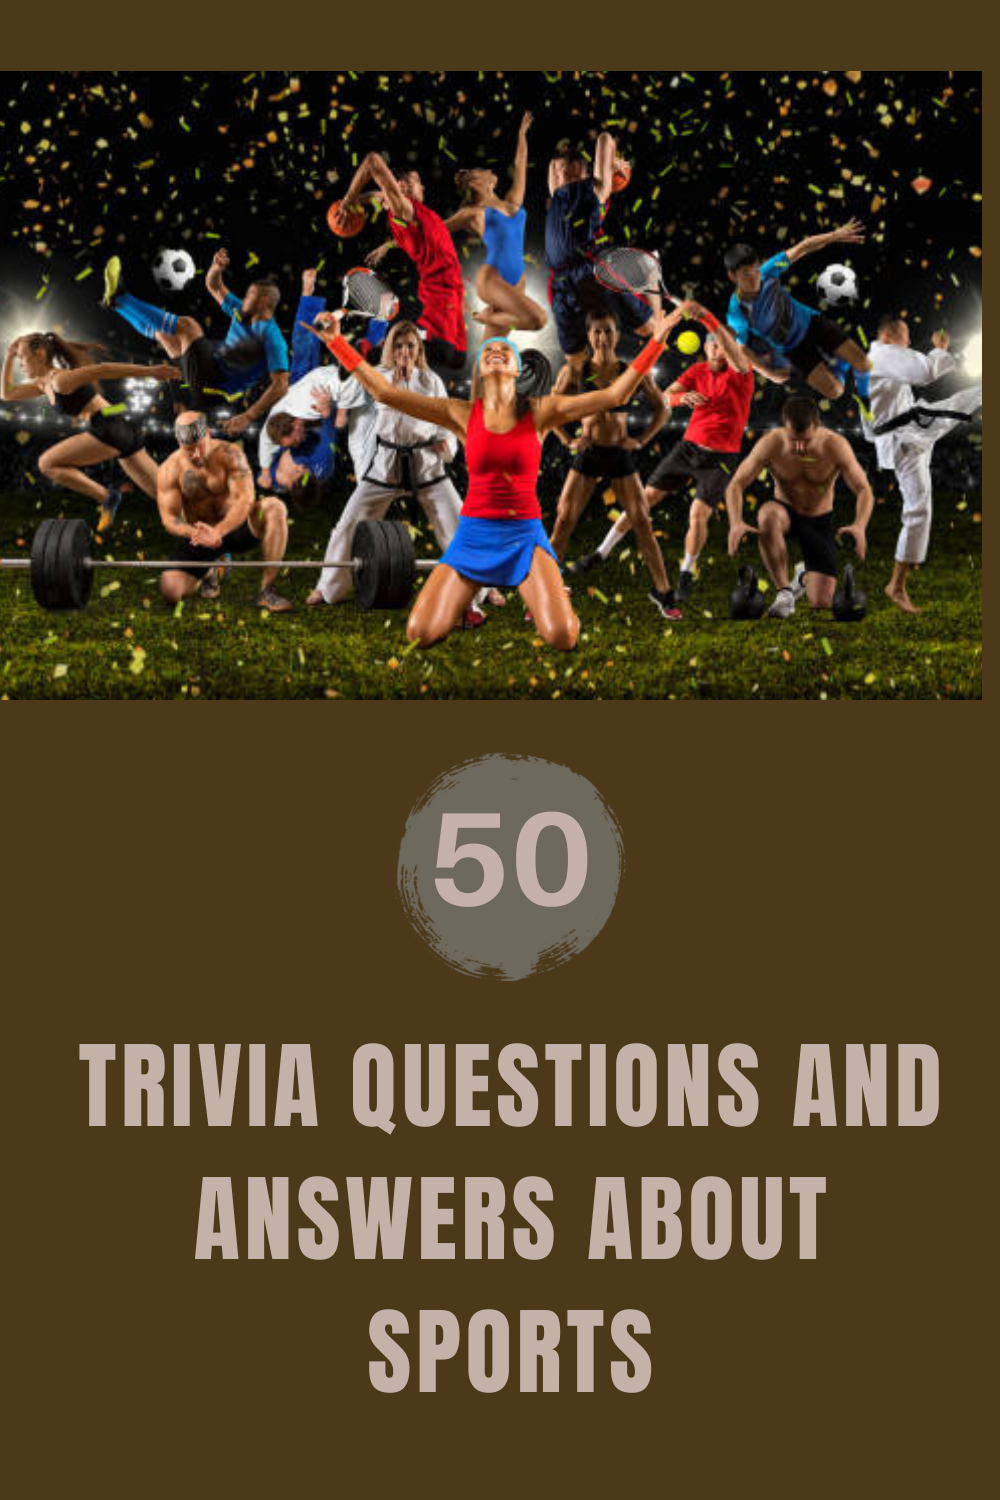 Trivia Questions and Answers about Sports